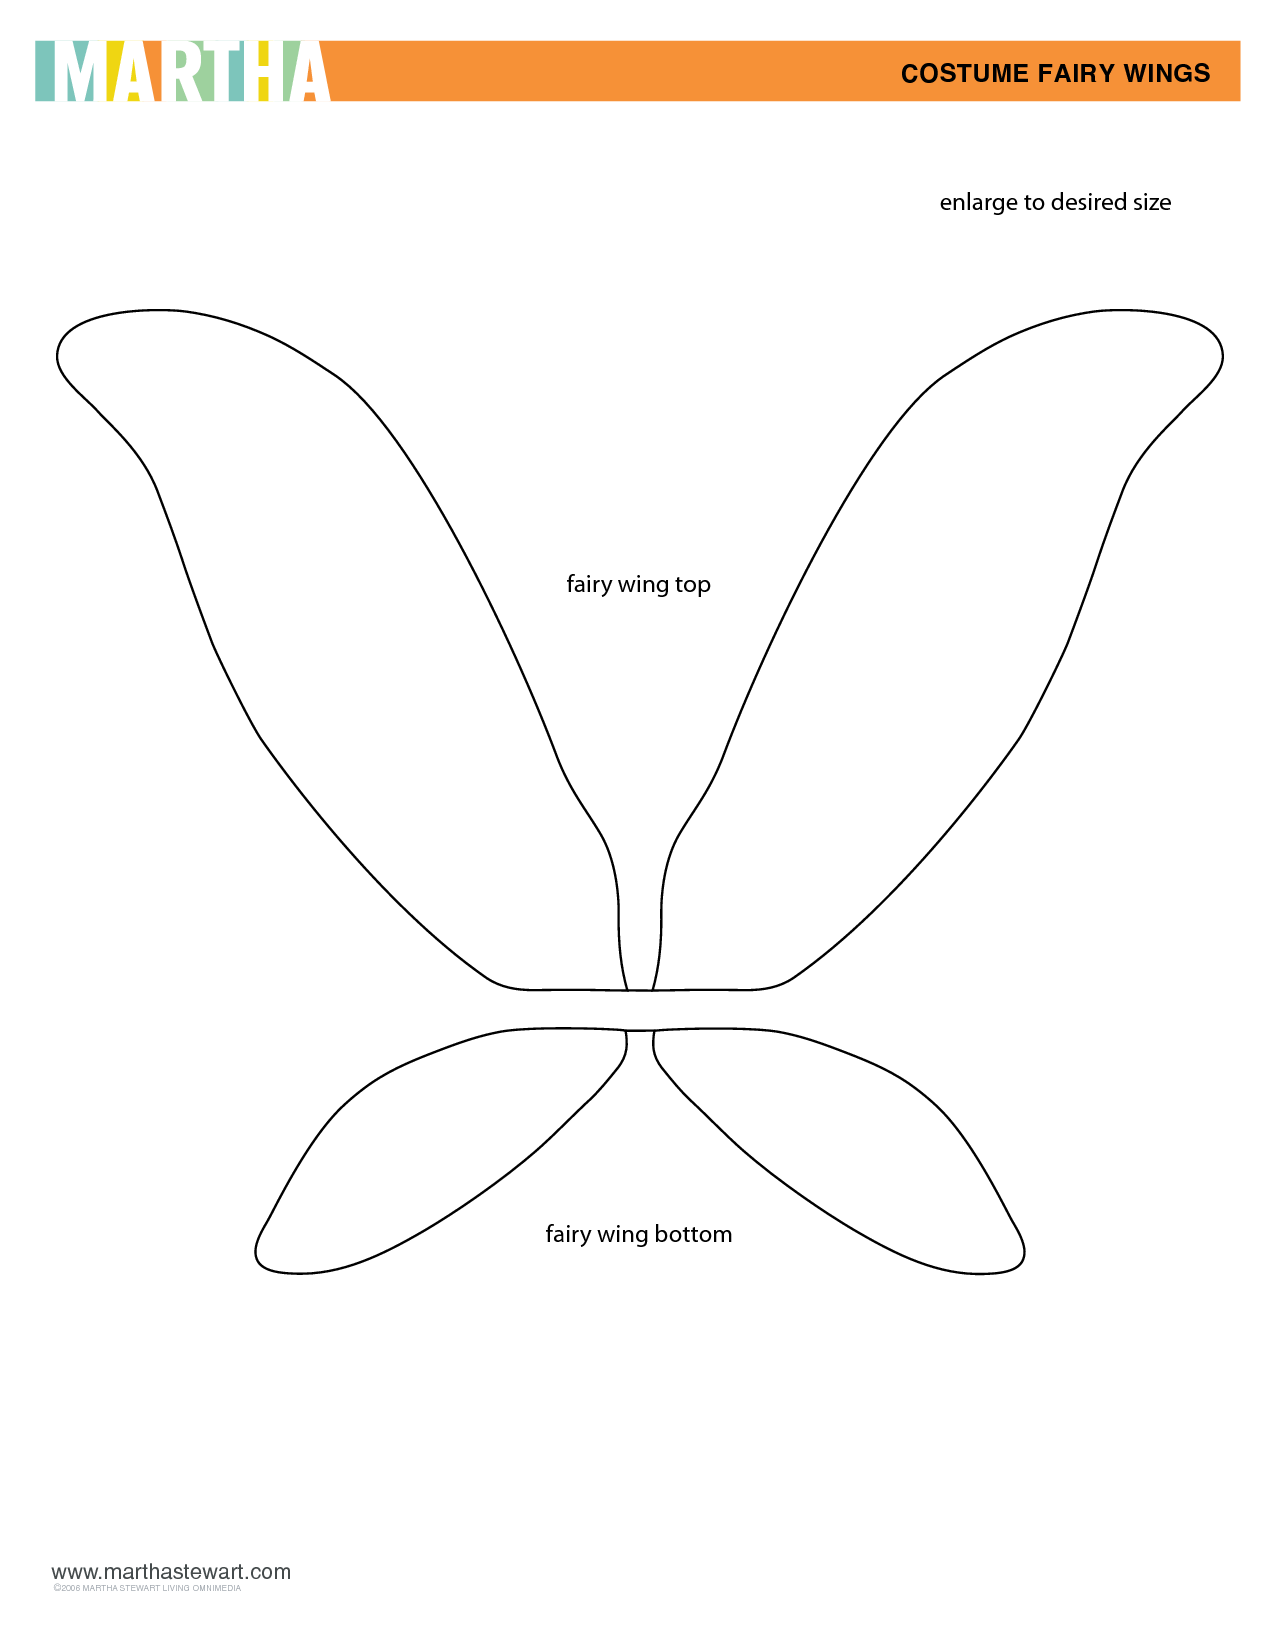 free-costume-wings-outline-download-free-costume-wings-outline-png